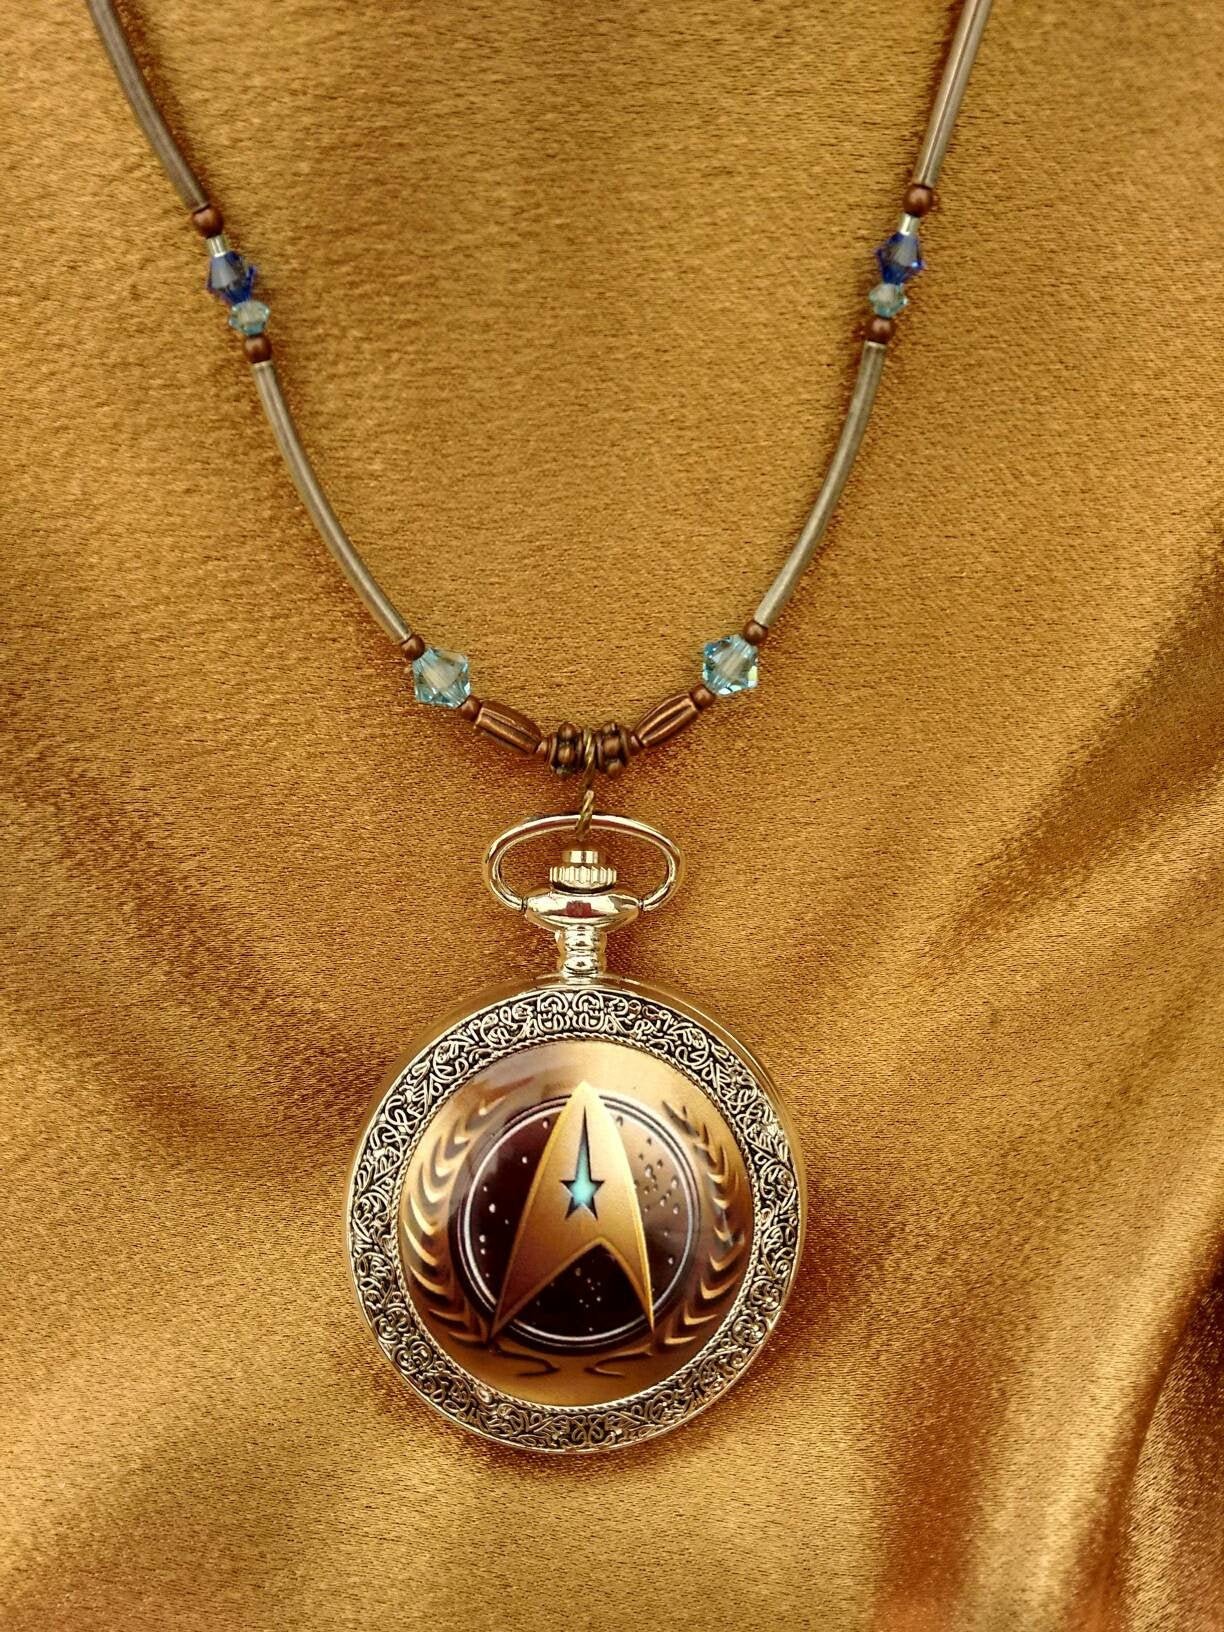 pocket watch necklace, pocket watch, watch jewelry, science fiction gifts